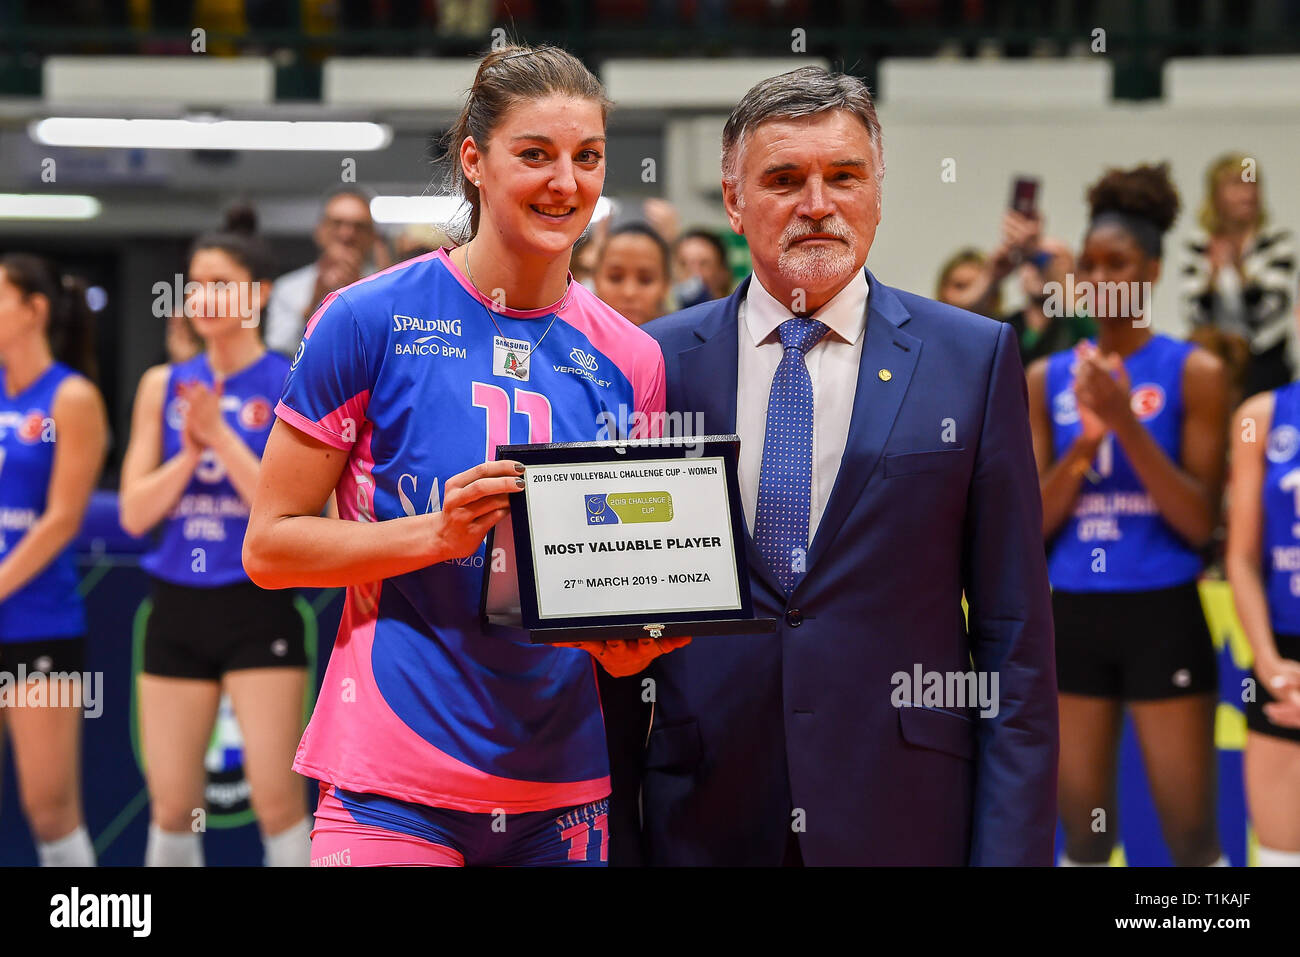 Candy Arena, Monza, Italy. 27th March, 2019. CEV Volleyball Challenge Cup women, Final, 2nd leg. Anne Buijs of Saugella Monza MVP of the finals of Challenge Cup after the match between Saugella Monza and Aydin BBSK at the Candy Arena Italy.  Credit: Claudio Grassi/Alamy Live News Stock Photo